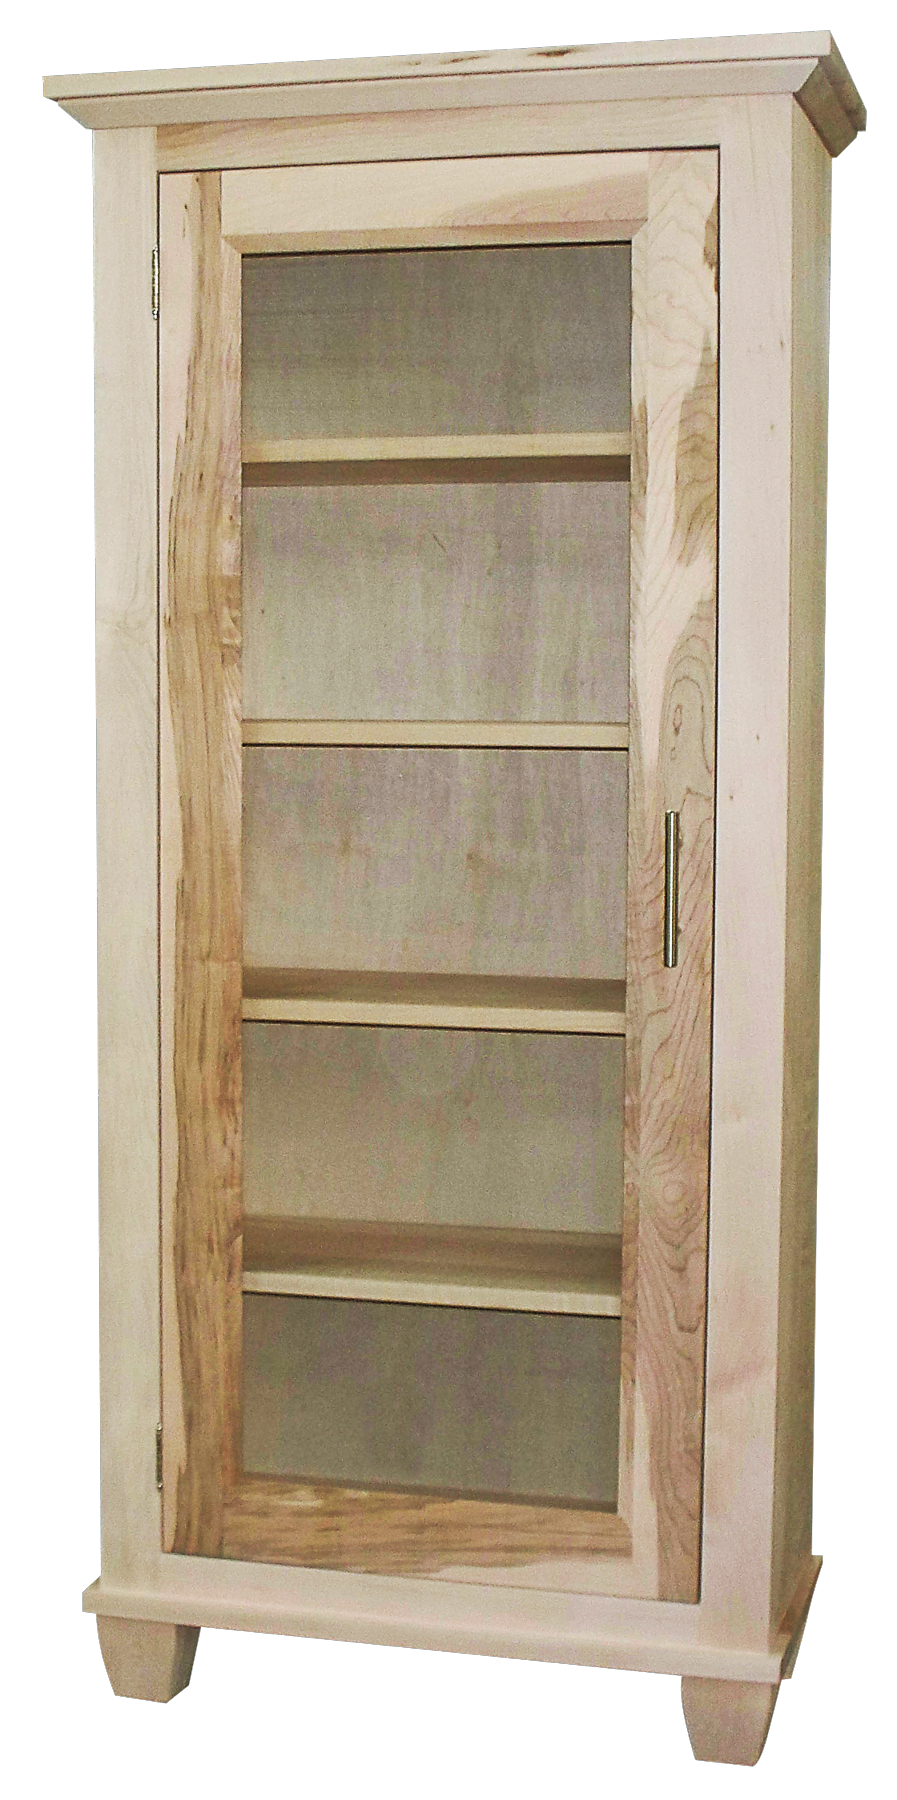 Algonquin bookcase with door in unfinished brown maple